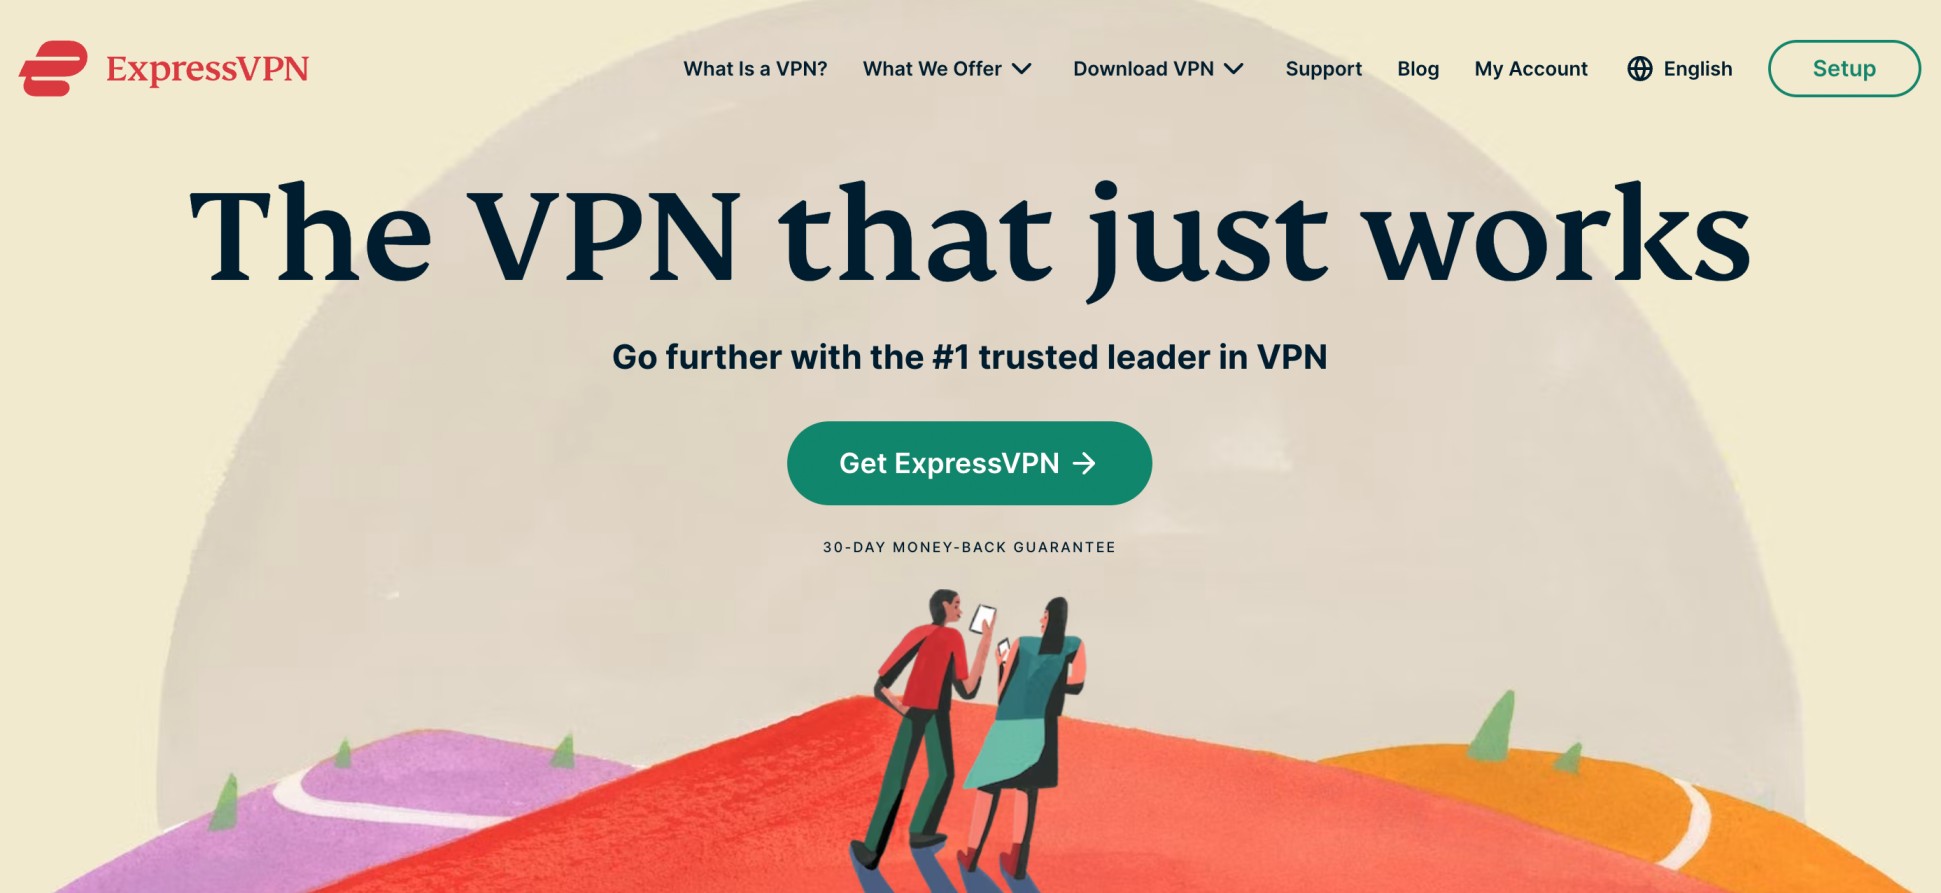 What Payment Methods Does ExpressVPN Accept?